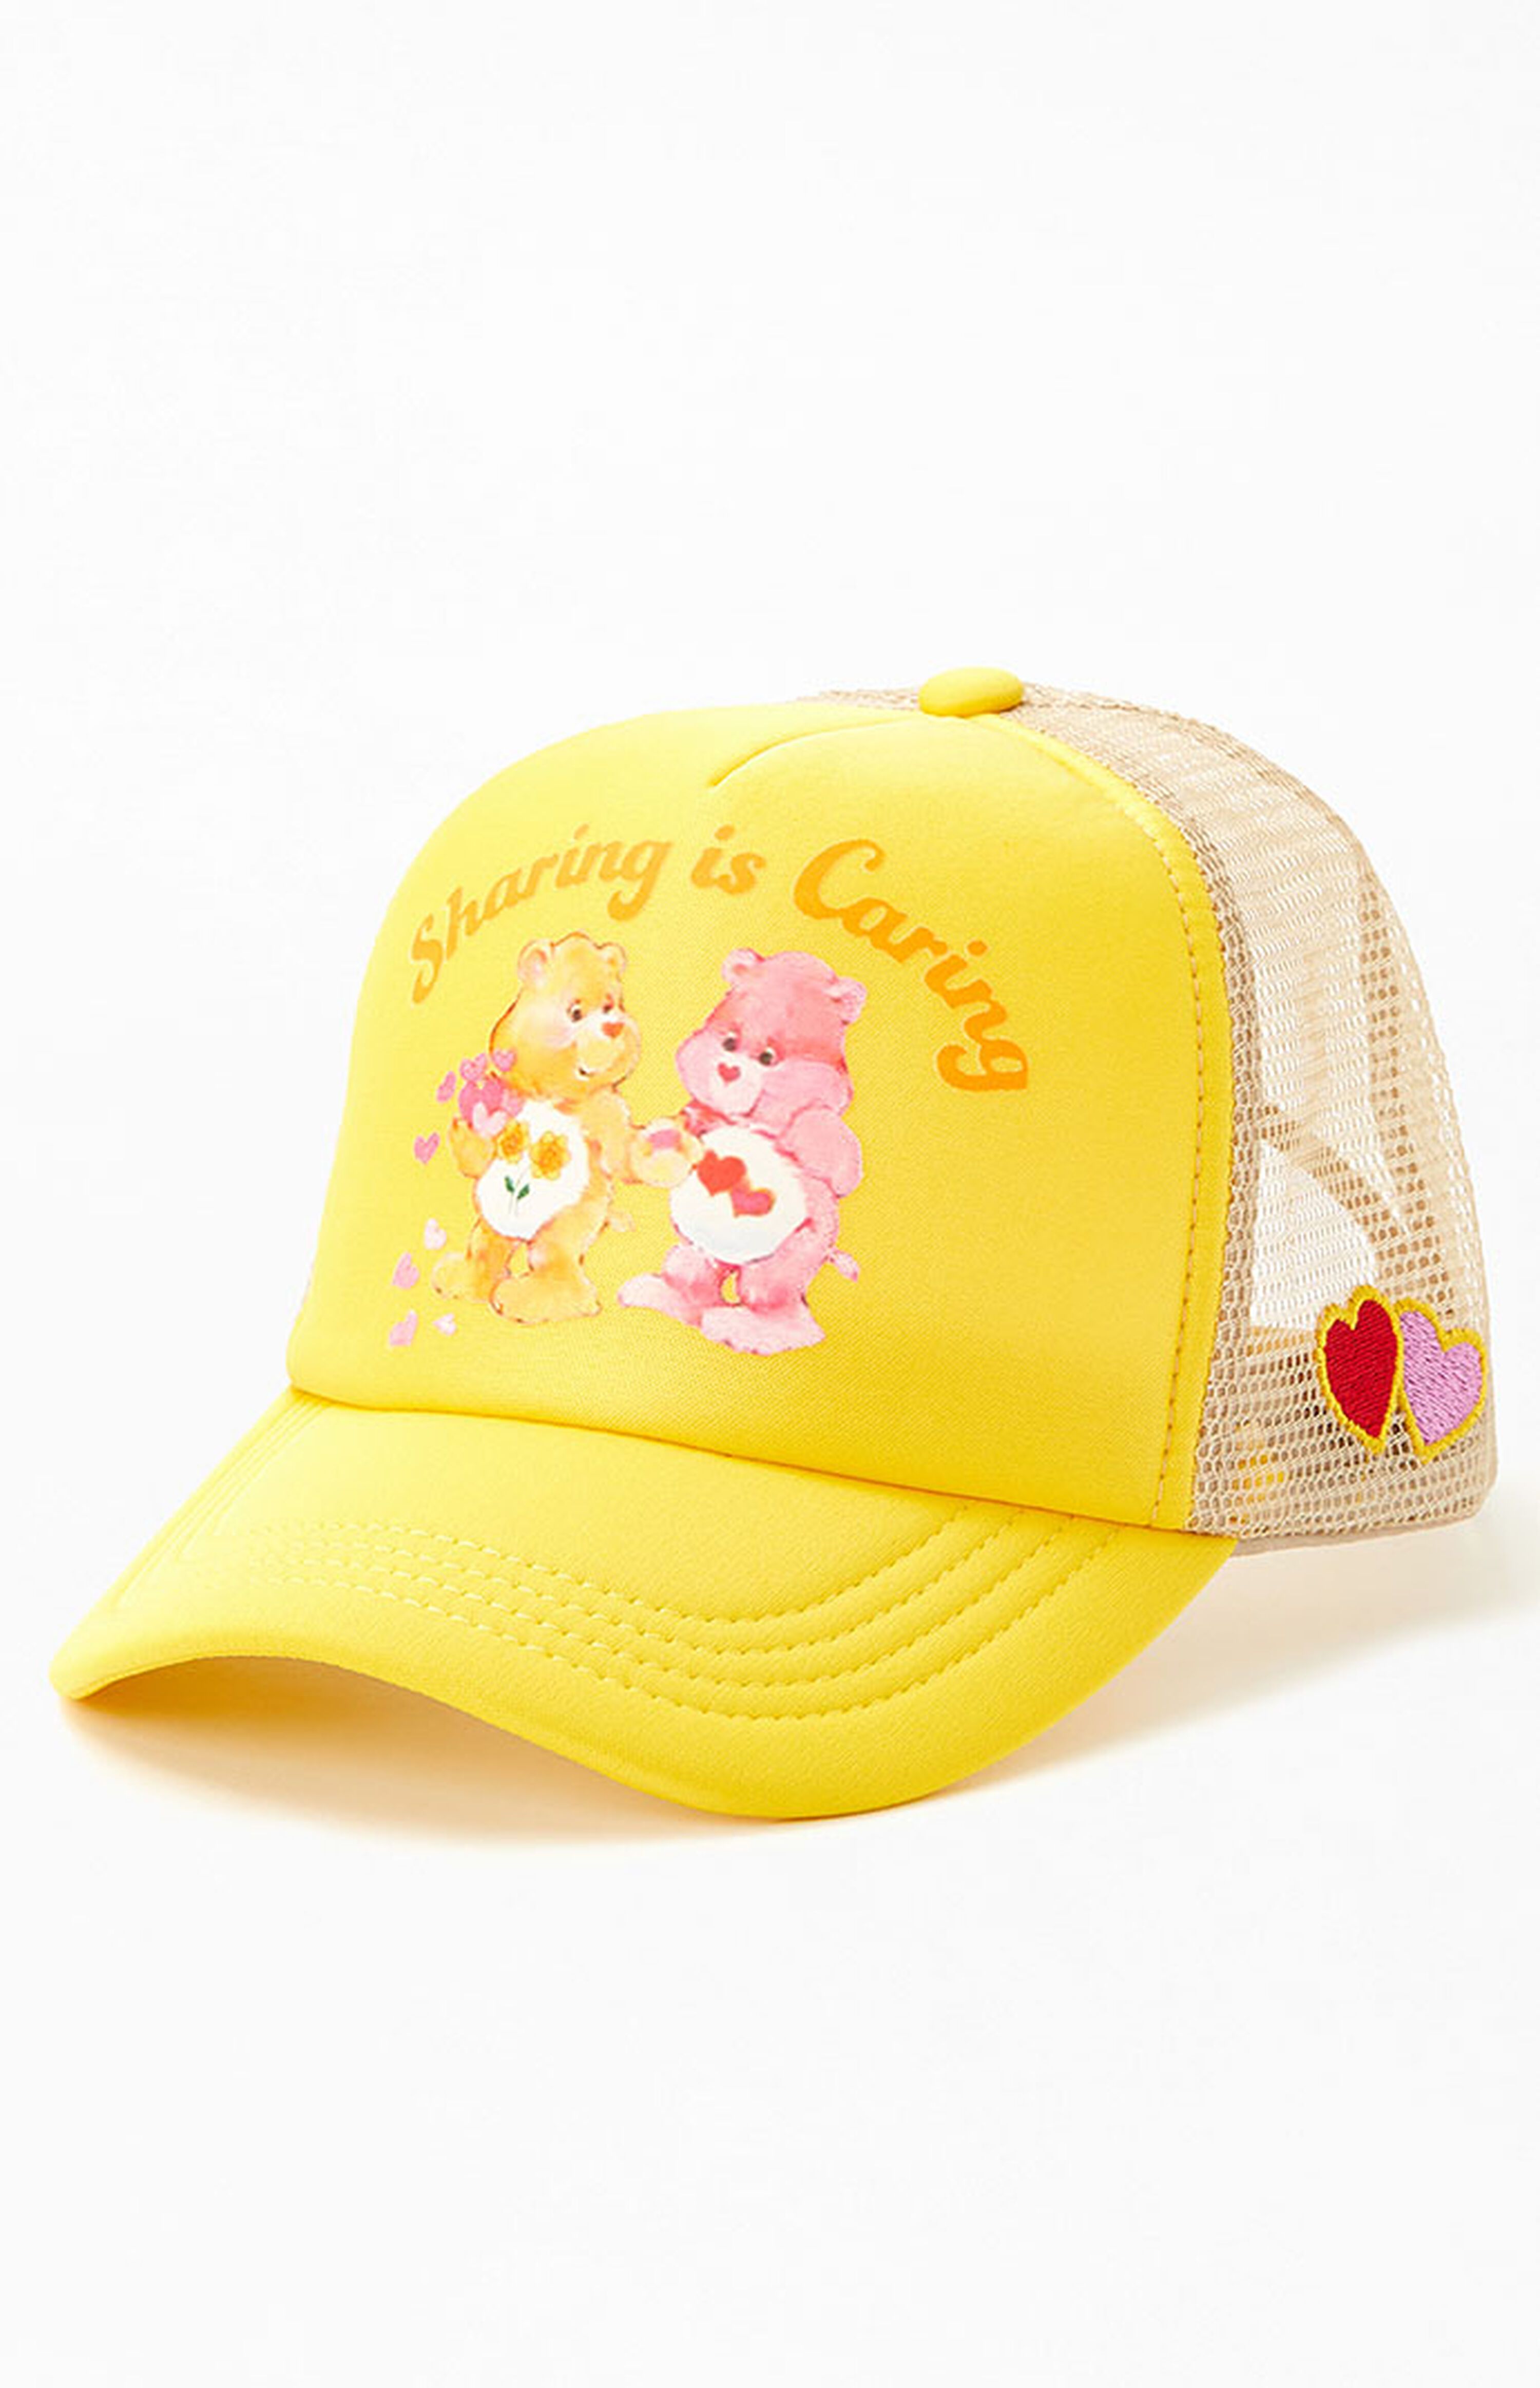 CARE BEARS Sharing Is Caring Trucker Hat | PacSun